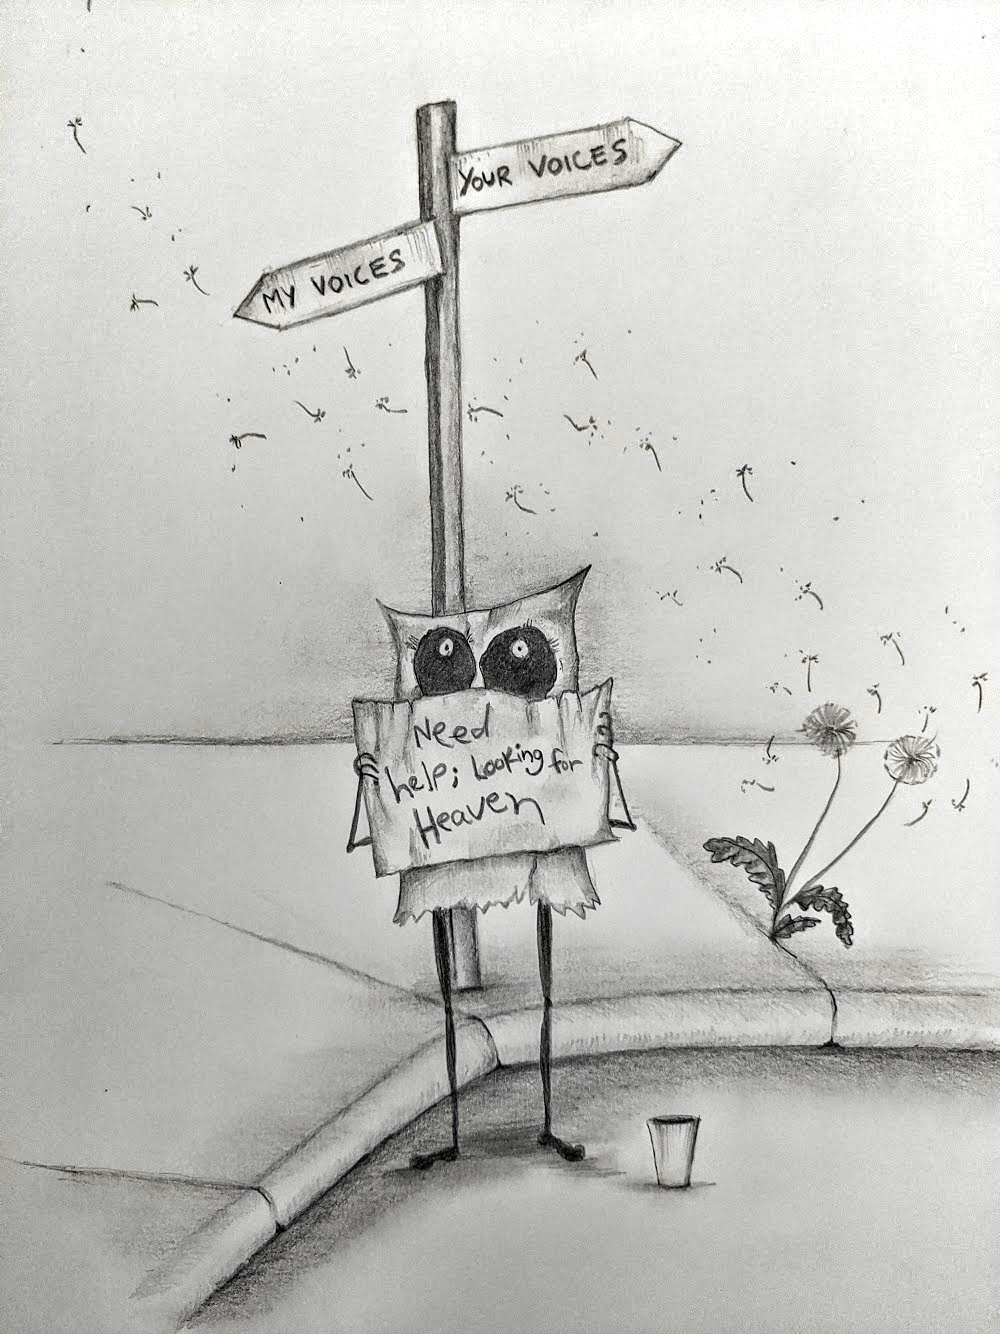 IMAGE: An anthropomorphic paper bag stands on a street corner. It stands in front of a directional sign with opposite arrows labeled "My voices" and "Your voices." The bag itself holds a sign that reads "Need help; looking for Heaven," and a cup sits at its feet. Two dandelion seedheads sprout from the sidewalk, and seeds float on the wind.